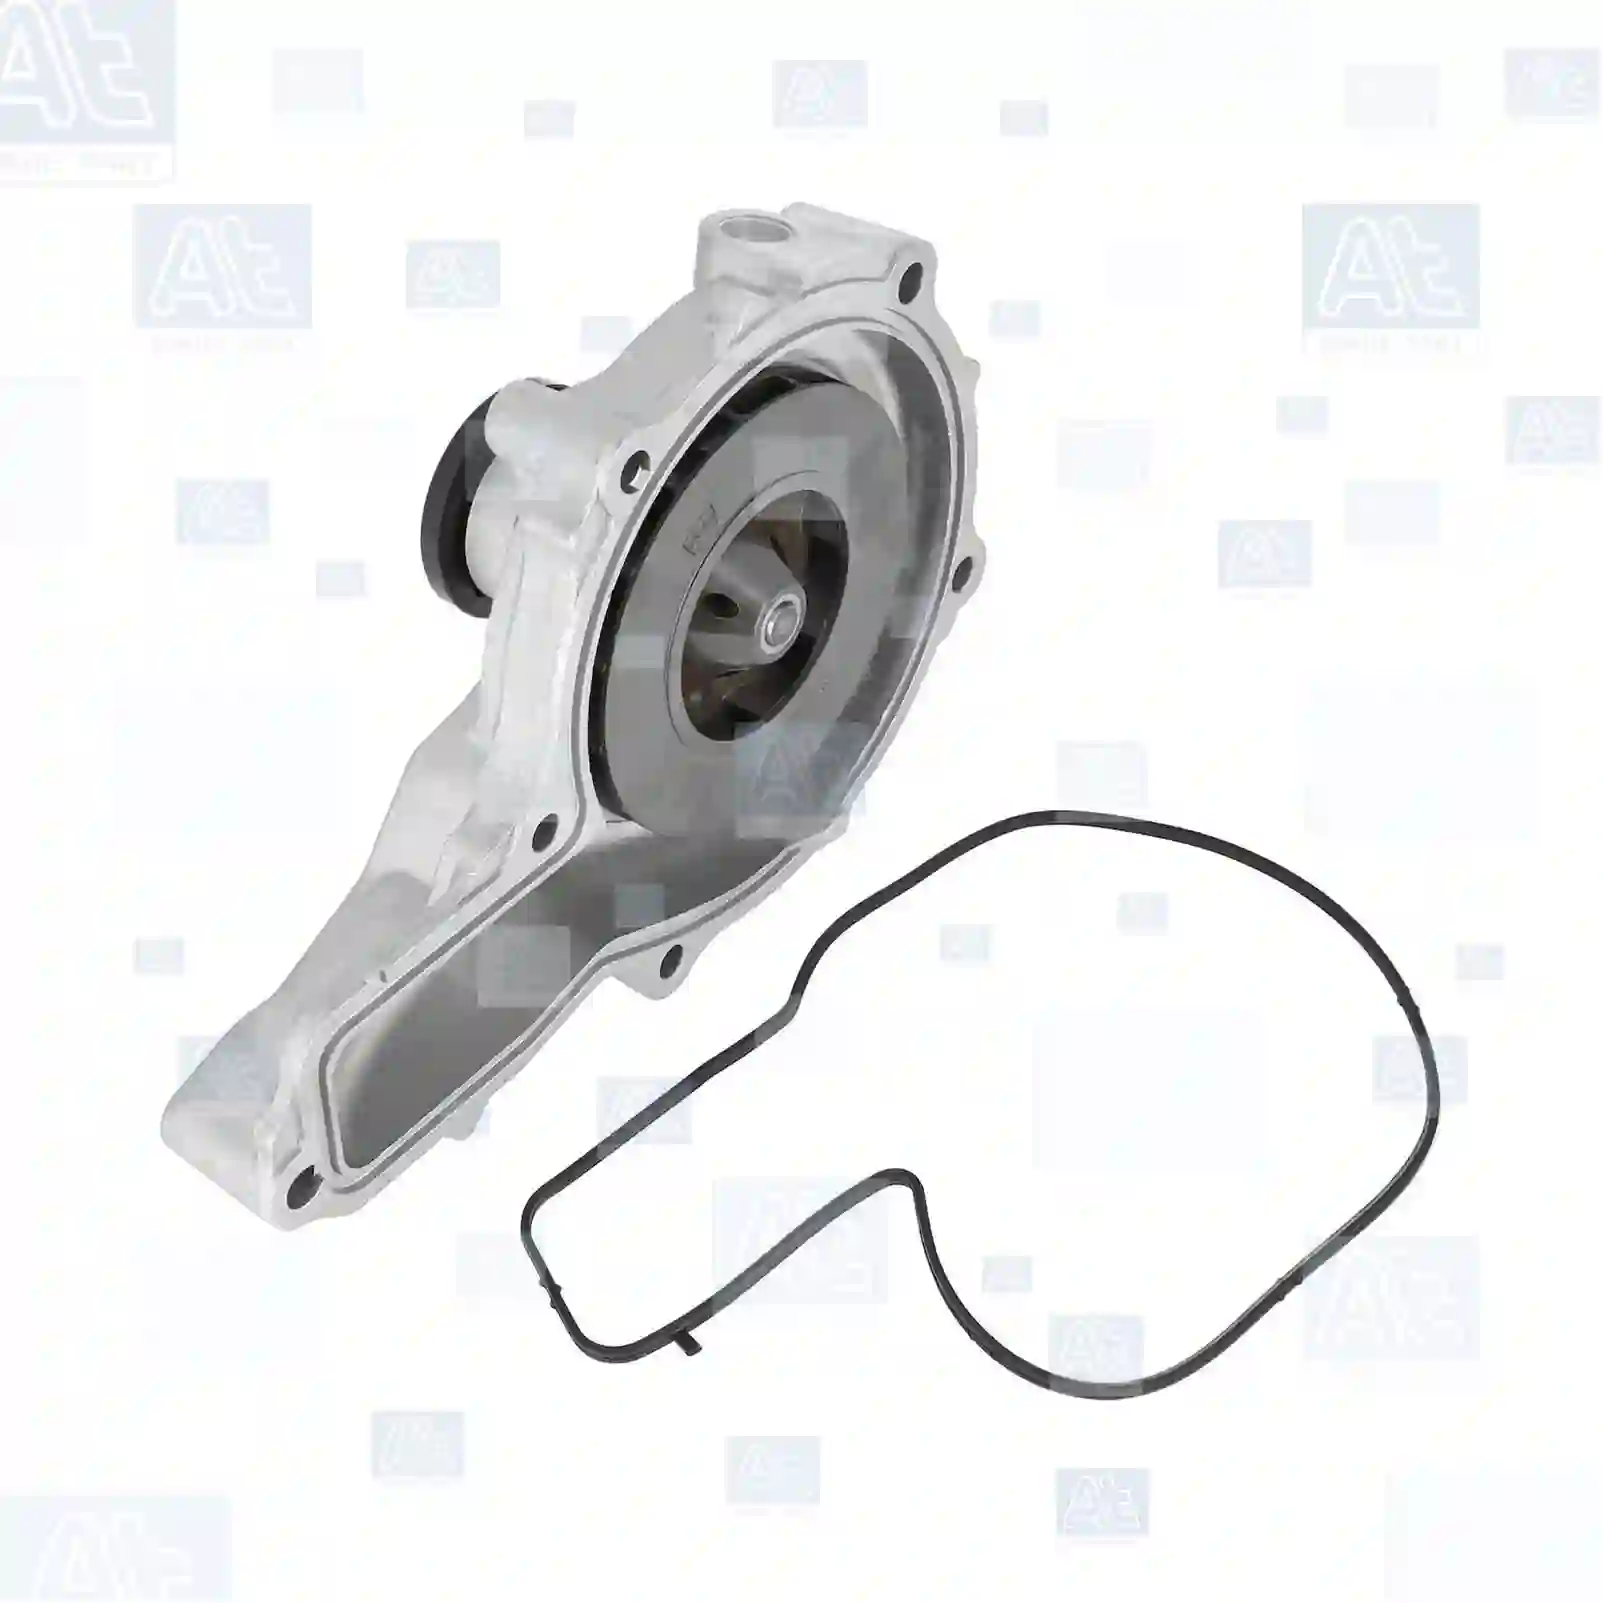 Water pump, without pulley, at no 77707128, oem no: 20744944, 21228795, 21468472, 22195450, 85003160, 85003709, 7420744939, 7420744940, 7421615952, 7422167707, 7422197707, 7485000763, 7485013068, 20451516, 20464403, 20538820, 20538845, 20744939, 20744940, 21221878, 21228793, 21468471, 21615952, 2201101, 22195450, 22197705, 22902431, 3161436, 3801102, 3801418, 3801484, 3803844, 3803930, 85000062, 85000347, 85000486, 85003125, 85003708, 85006062, 85020085, 85021450, ZG00771-0008 At Spare Part | Engine, Accelerator Pedal, Camshaft, Connecting Rod, Crankcase, Crankshaft, Cylinder Head, Engine Suspension Mountings, Exhaust Manifold, Exhaust Gas Recirculation, Filter Kits, Flywheel Housing, General Overhaul Kits, Engine, Intake Manifold, Oil Cleaner, Oil Cooler, Oil Filter, Oil Pump, Oil Sump, Piston & Liner, Sensor & Switch, Timing Case, Turbocharger, Cooling System, Belt Tensioner, Coolant Filter, Coolant Pipe, Corrosion Prevention Agent, Drive, Expansion Tank, Fan, Intercooler, Monitors & Gauges, Radiator, Thermostat, V-Belt / Timing belt, Water Pump, Fuel System, Electronical Injector Unit, Feed Pump, Fuel Filter, cpl., Fuel Gauge Sender,  Fuel Line, Fuel Pump, Fuel Tank, Injection Line Kit, Injection Pump, Exhaust System, Clutch & Pedal, Gearbox, Propeller Shaft, Axles, Brake System, Hubs & Wheels, Suspension, Leaf Spring, Universal Parts / Accessories, Steering, Electrical System, Cabin Water pump, without pulley, at no 77707128, oem no: 20744944, 21228795, 21468472, 22195450, 85003160, 85003709, 7420744939, 7420744940, 7421615952, 7422167707, 7422197707, 7485000763, 7485013068, 20451516, 20464403, 20538820, 20538845, 20744939, 20744940, 21221878, 21228793, 21468471, 21615952, 2201101, 22195450, 22197705, 22902431, 3161436, 3801102, 3801418, 3801484, 3803844, 3803930, 85000062, 85000347, 85000486, 85003125, 85003708, 85006062, 85020085, 85021450, ZG00771-0008 At Spare Part | Engine, Accelerator Pedal, Camshaft, Connecting Rod, Crankcase, Crankshaft, Cylinder Head, Engine Suspension Mountings, Exhaust Manifold, Exhaust Gas Recirculation, Filter Kits, Flywheel Housing, General Overhaul Kits, Engine, Intake Manifold, Oil Cleaner, Oil Cooler, Oil Filter, Oil Pump, Oil Sump, Piston & Liner, Sensor & Switch, Timing Case, Turbocharger, Cooling System, Belt Tensioner, Coolant Filter, Coolant Pipe, Corrosion Prevention Agent, Drive, Expansion Tank, Fan, Intercooler, Monitors & Gauges, Radiator, Thermostat, V-Belt / Timing belt, Water Pump, Fuel System, Electronical Injector Unit, Feed Pump, Fuel Filter, cpl., Fuel Gauge Sender,  Fuel Line, Fuel Pump, Fuel Tank, Injection Line Kit, Injection Pump, Exhaust System, Clutch & Pedal, Gearbox, Propeller Shaft, Axles, Brake System, Hubs & Wheels, Suspension, Leaf Spring, Universal Parts / Accessories, Steering, Electrical System, Cabin